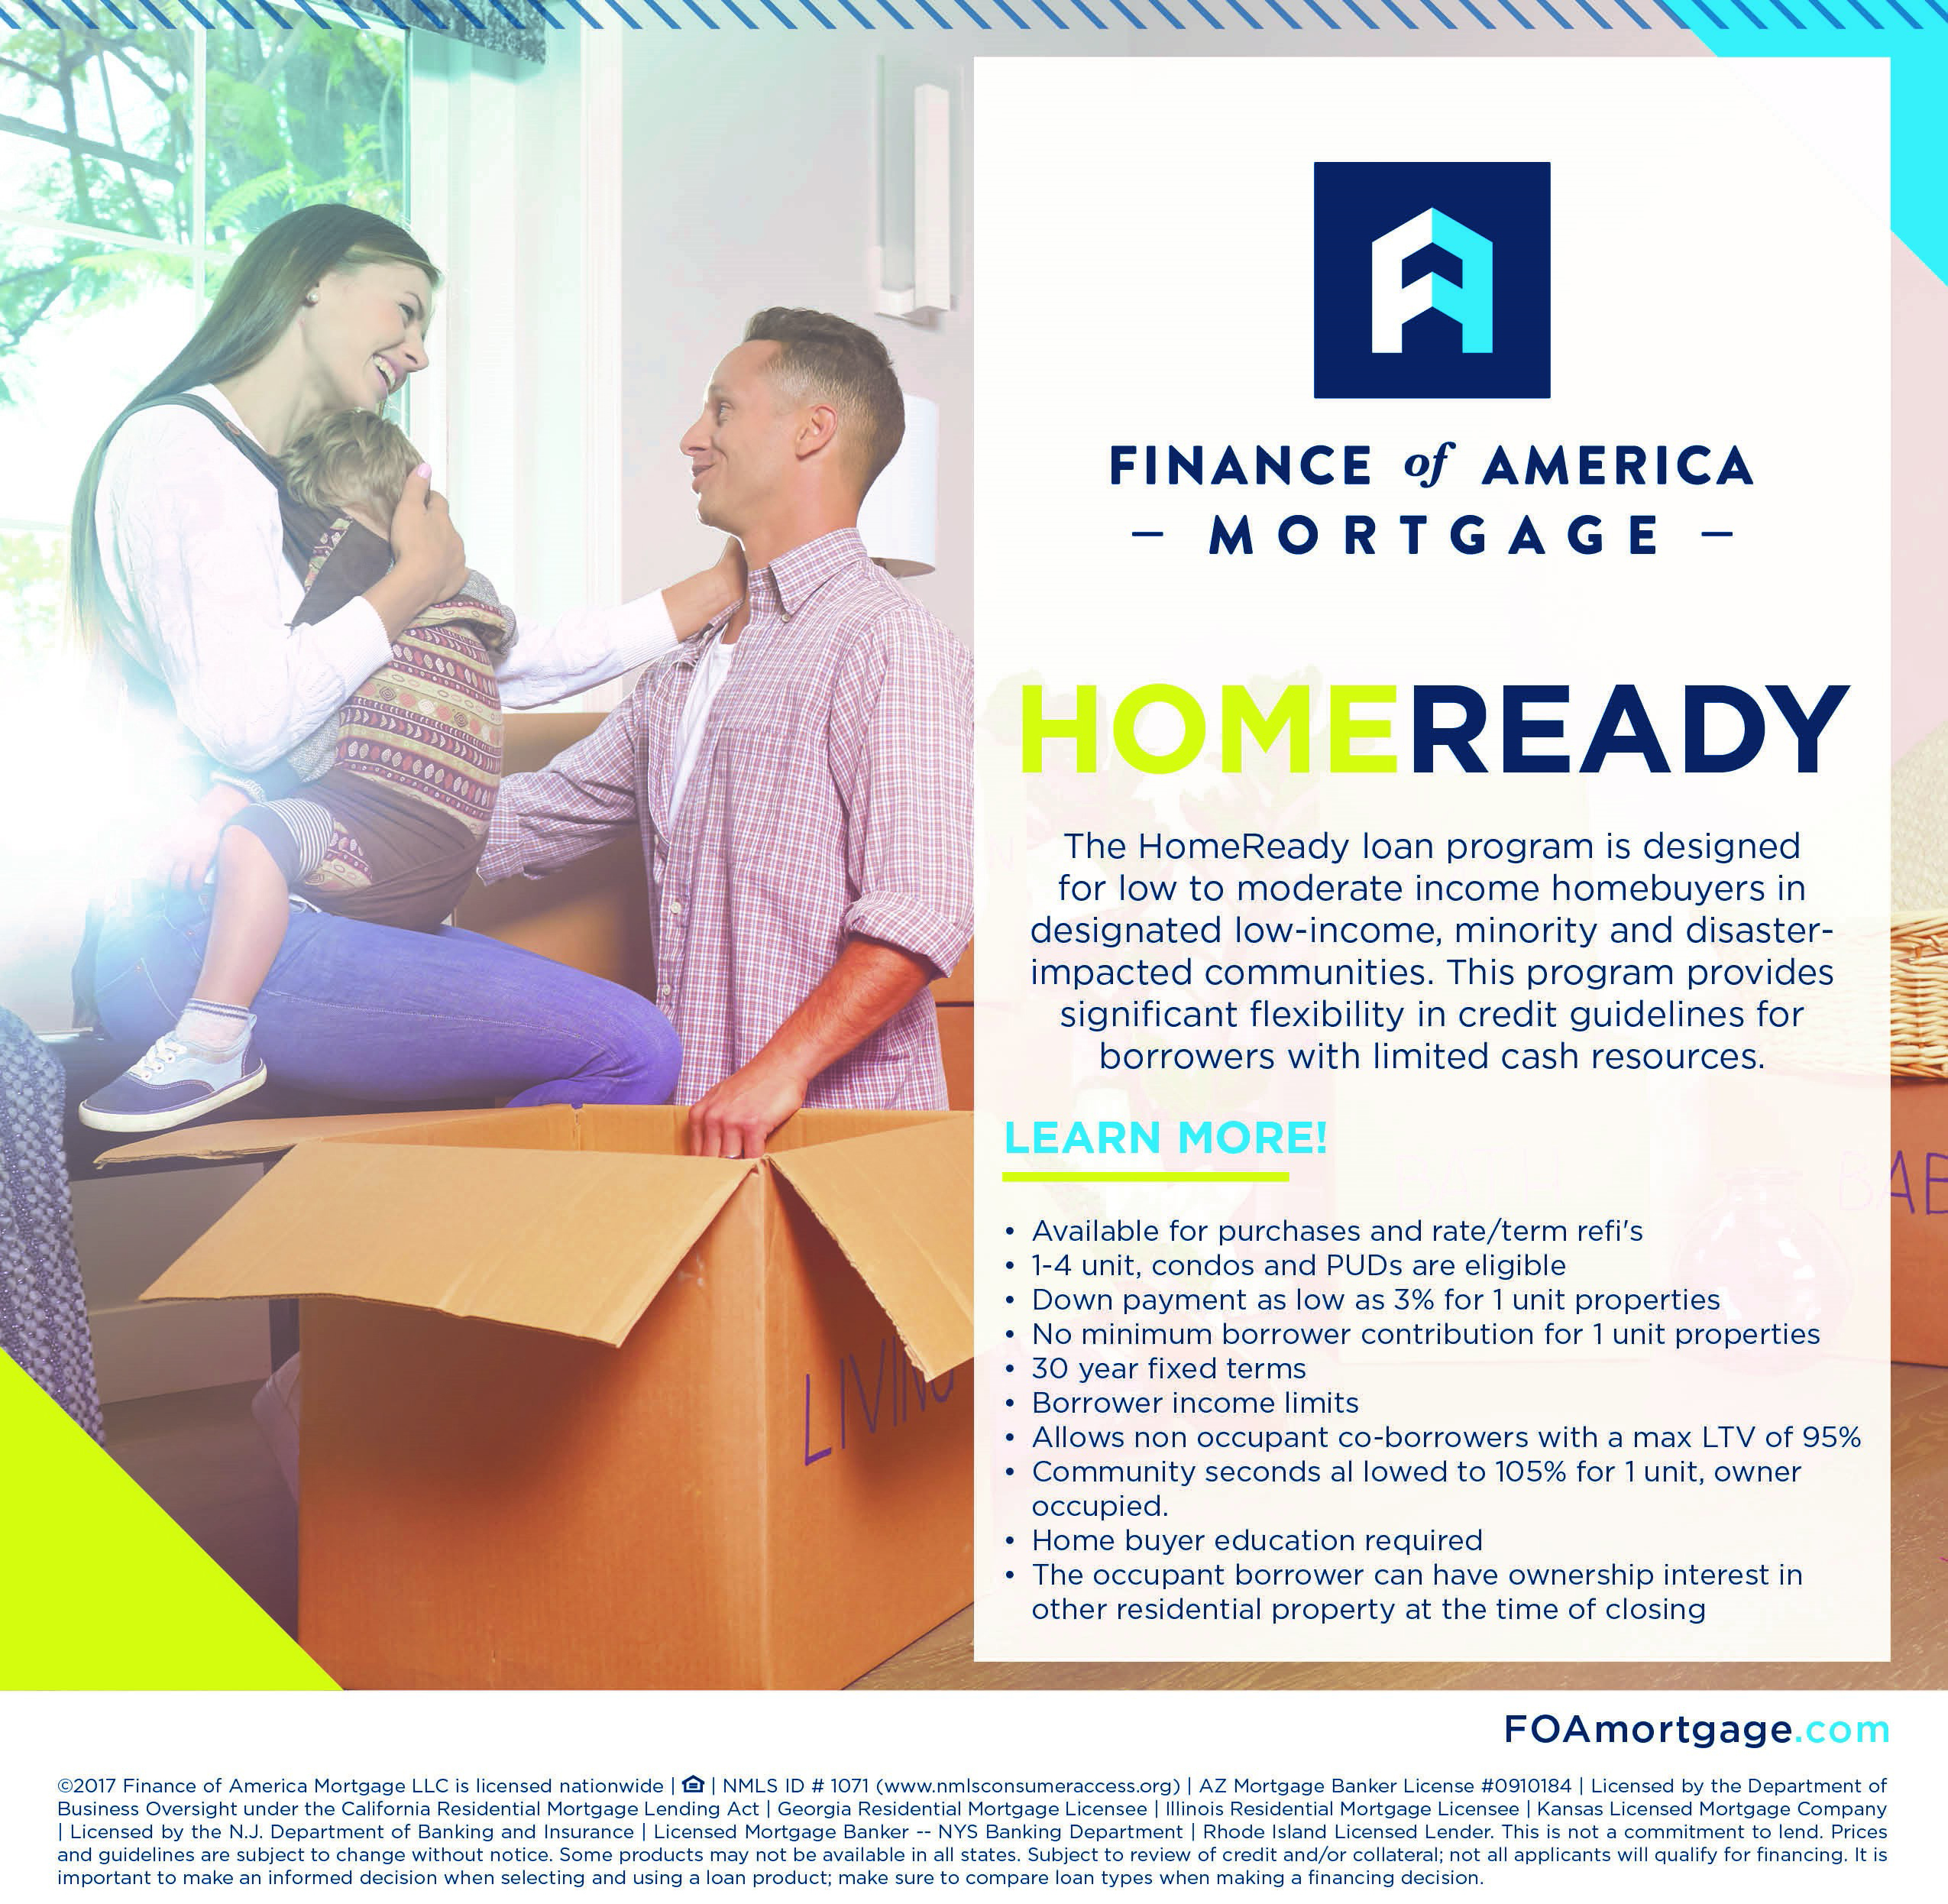 The Fannie Mae HOMEREADY loan better for you than FHA?